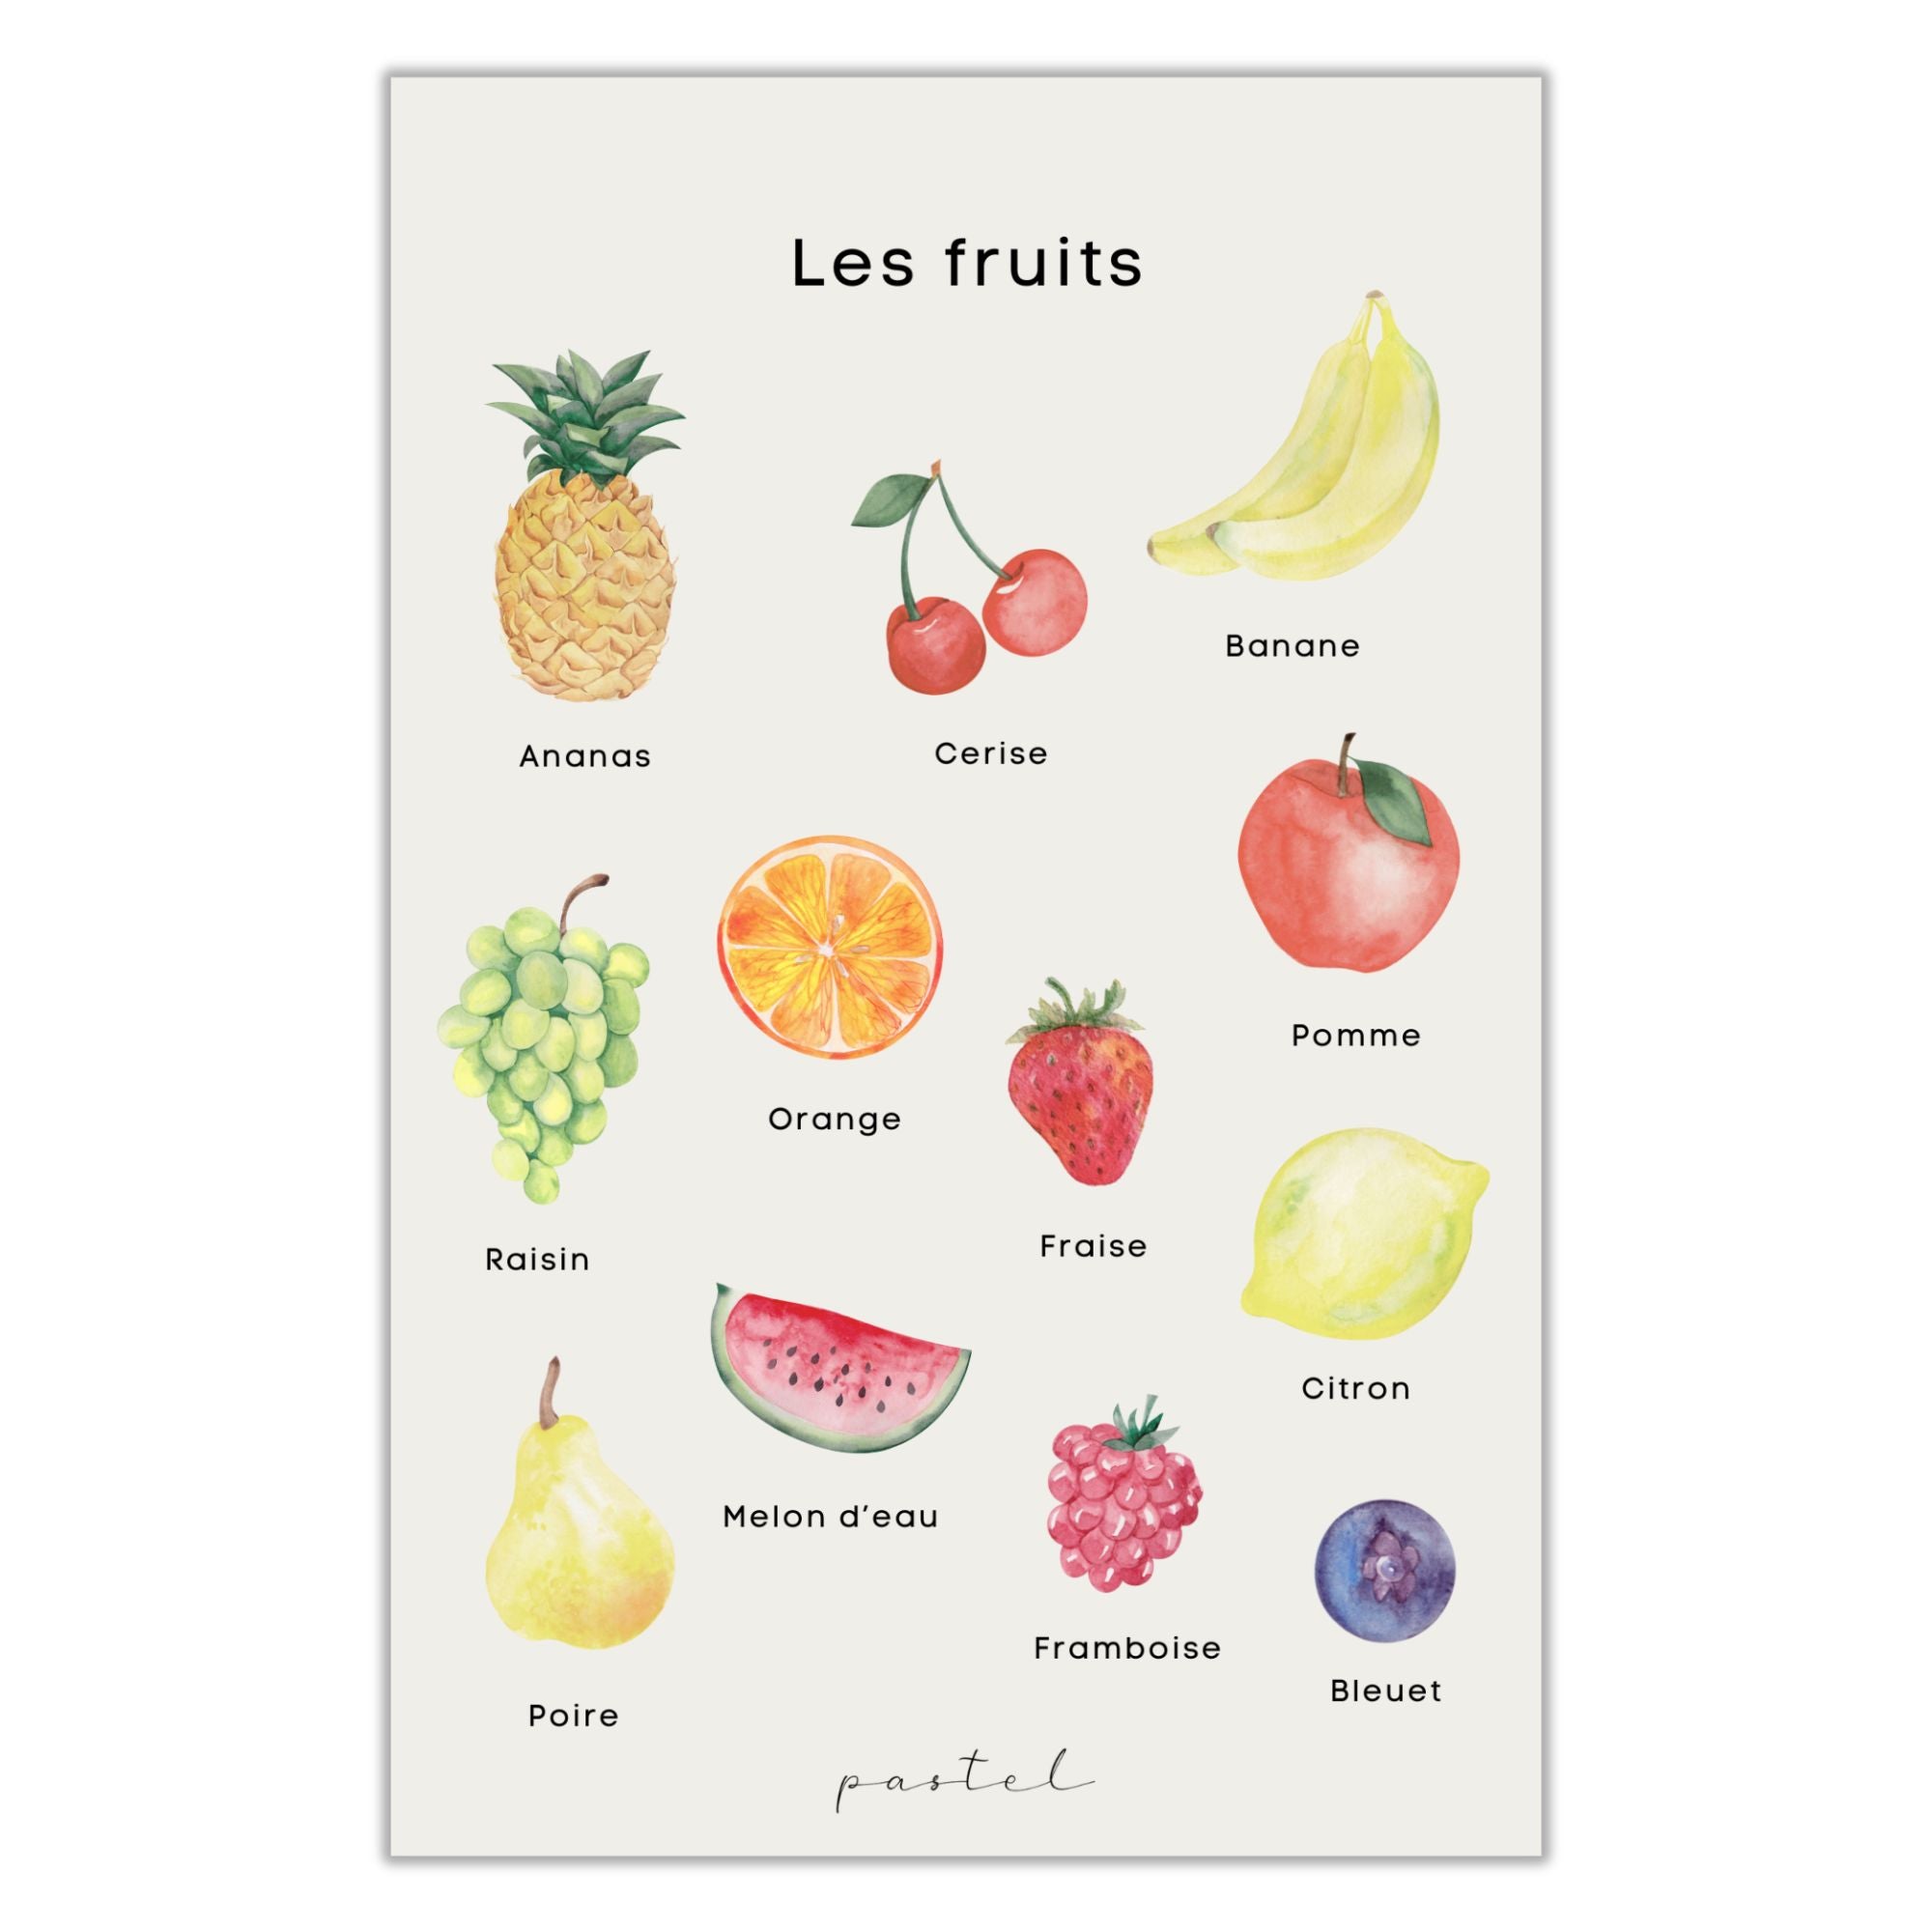 Decorative & Educational Poster "Fruits"